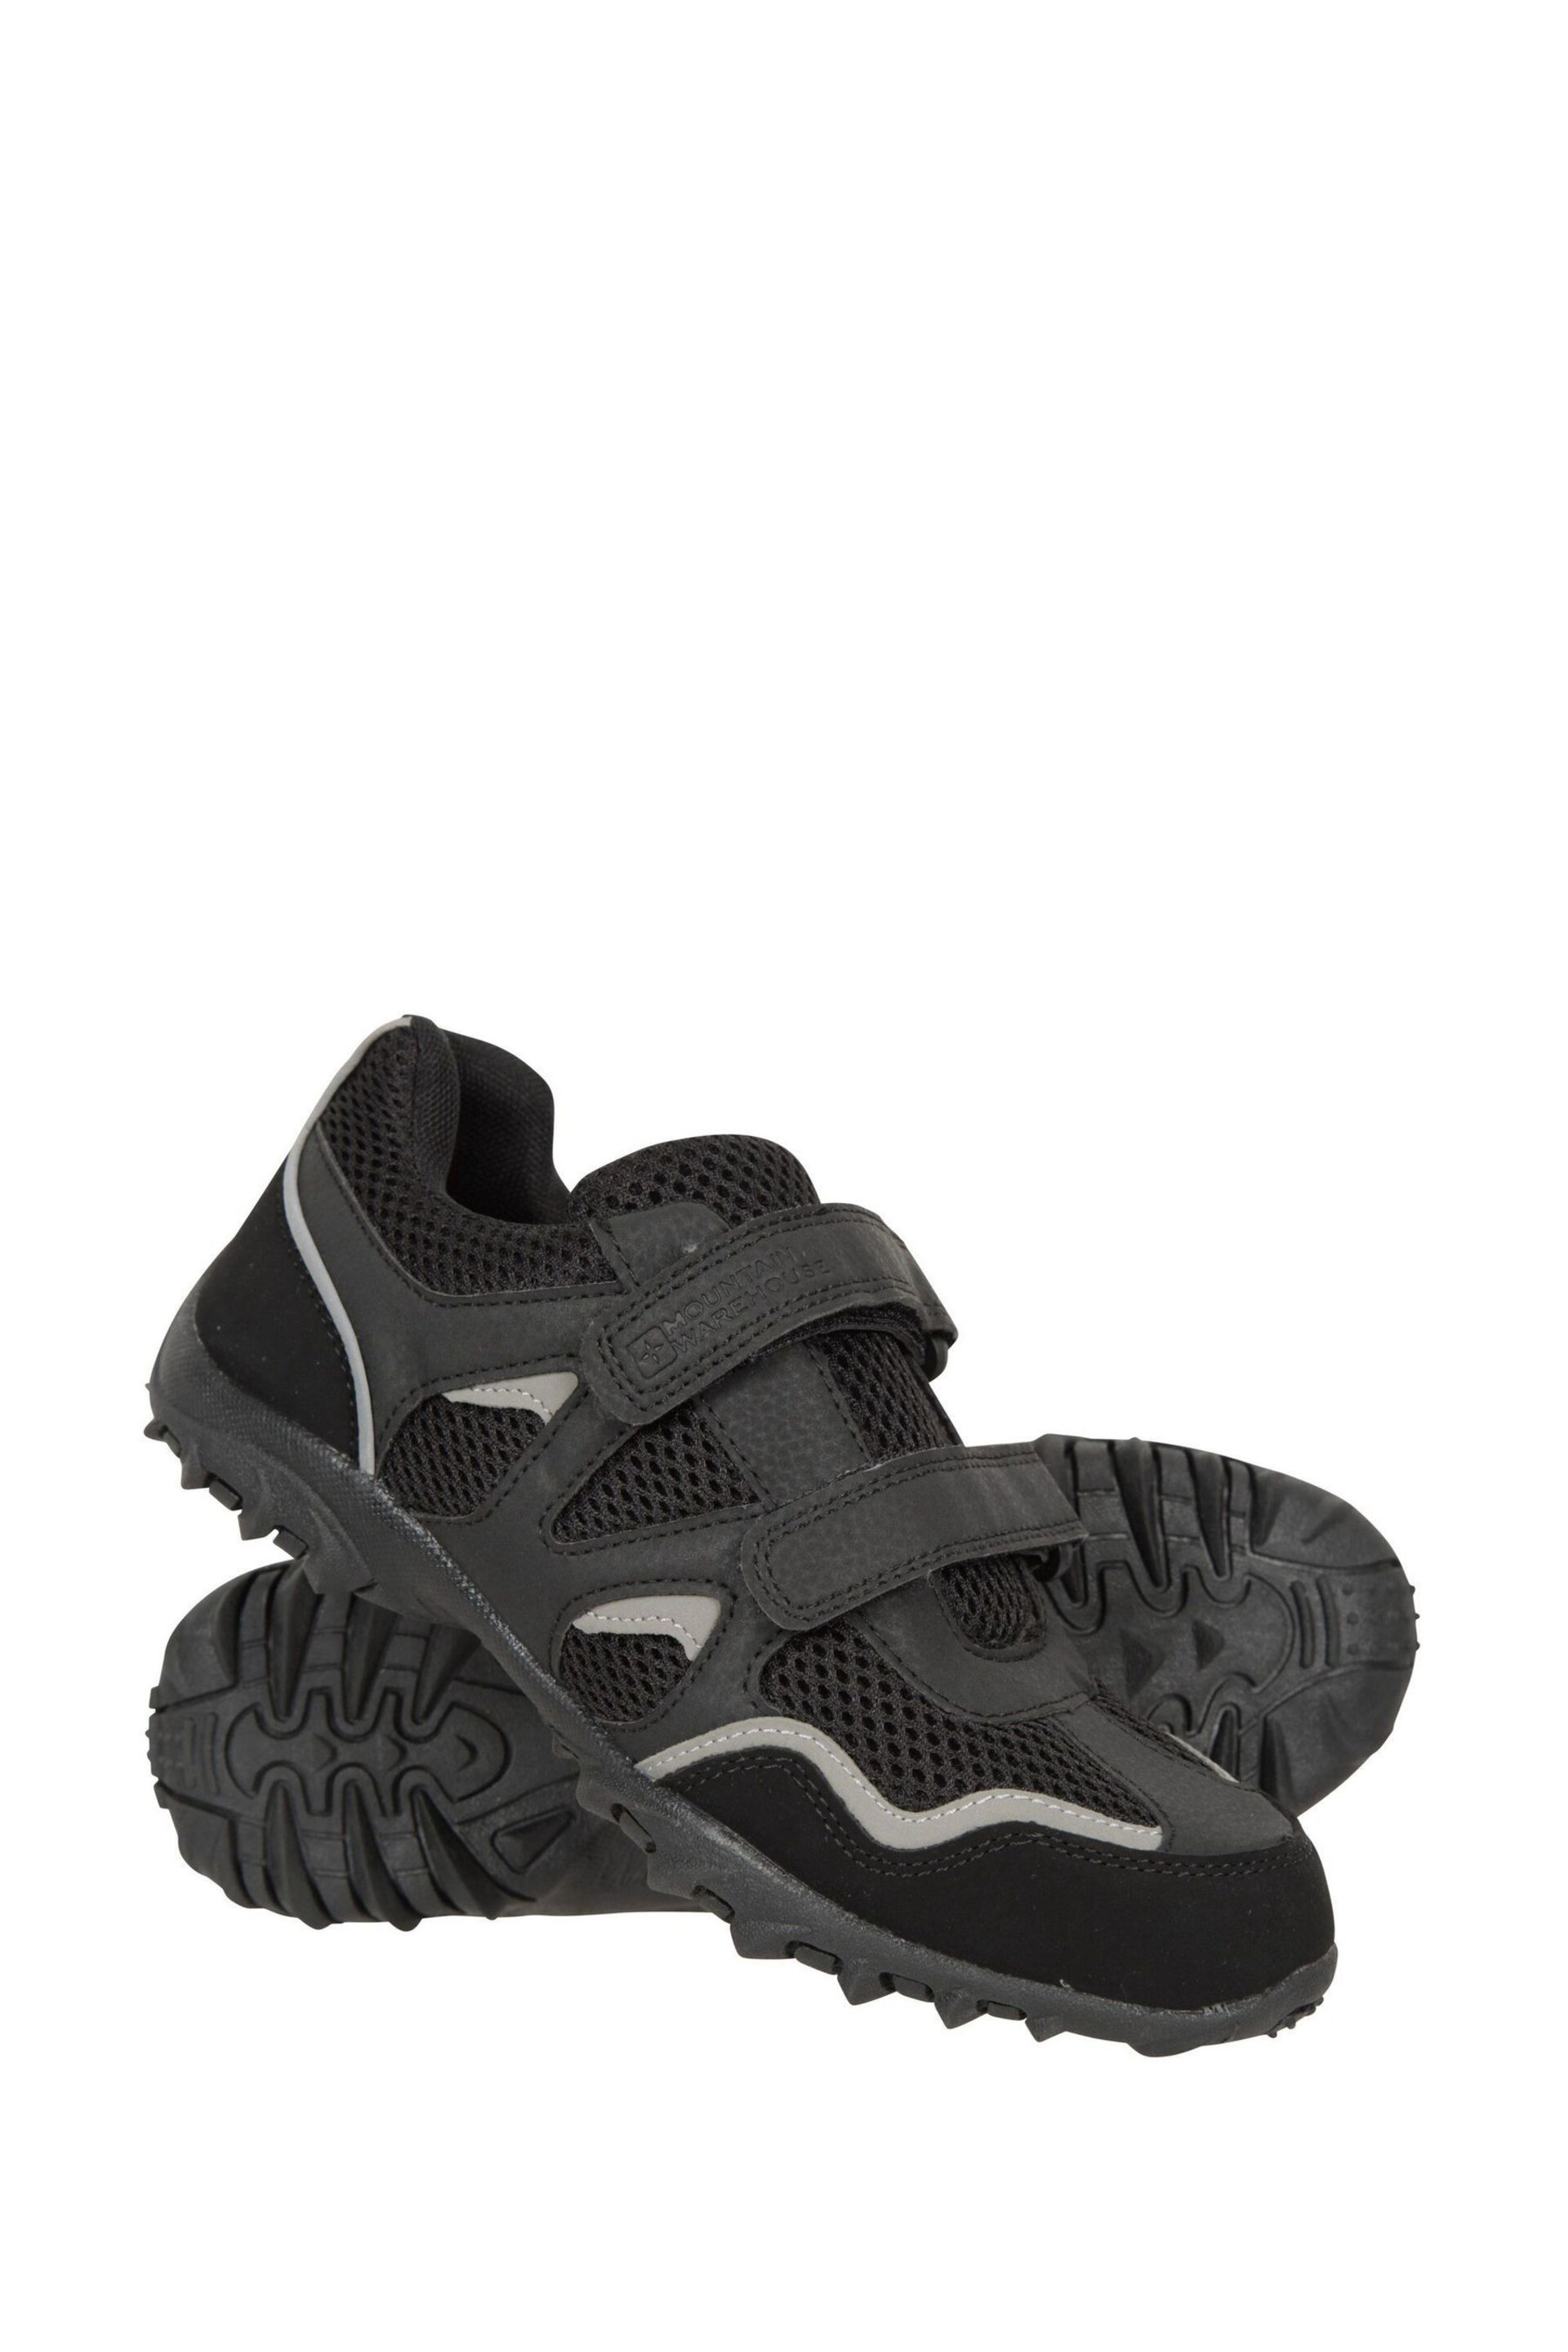 Mountain Warehouse Black Mars Kids Non-Marking Trainers - Image 1 of 5